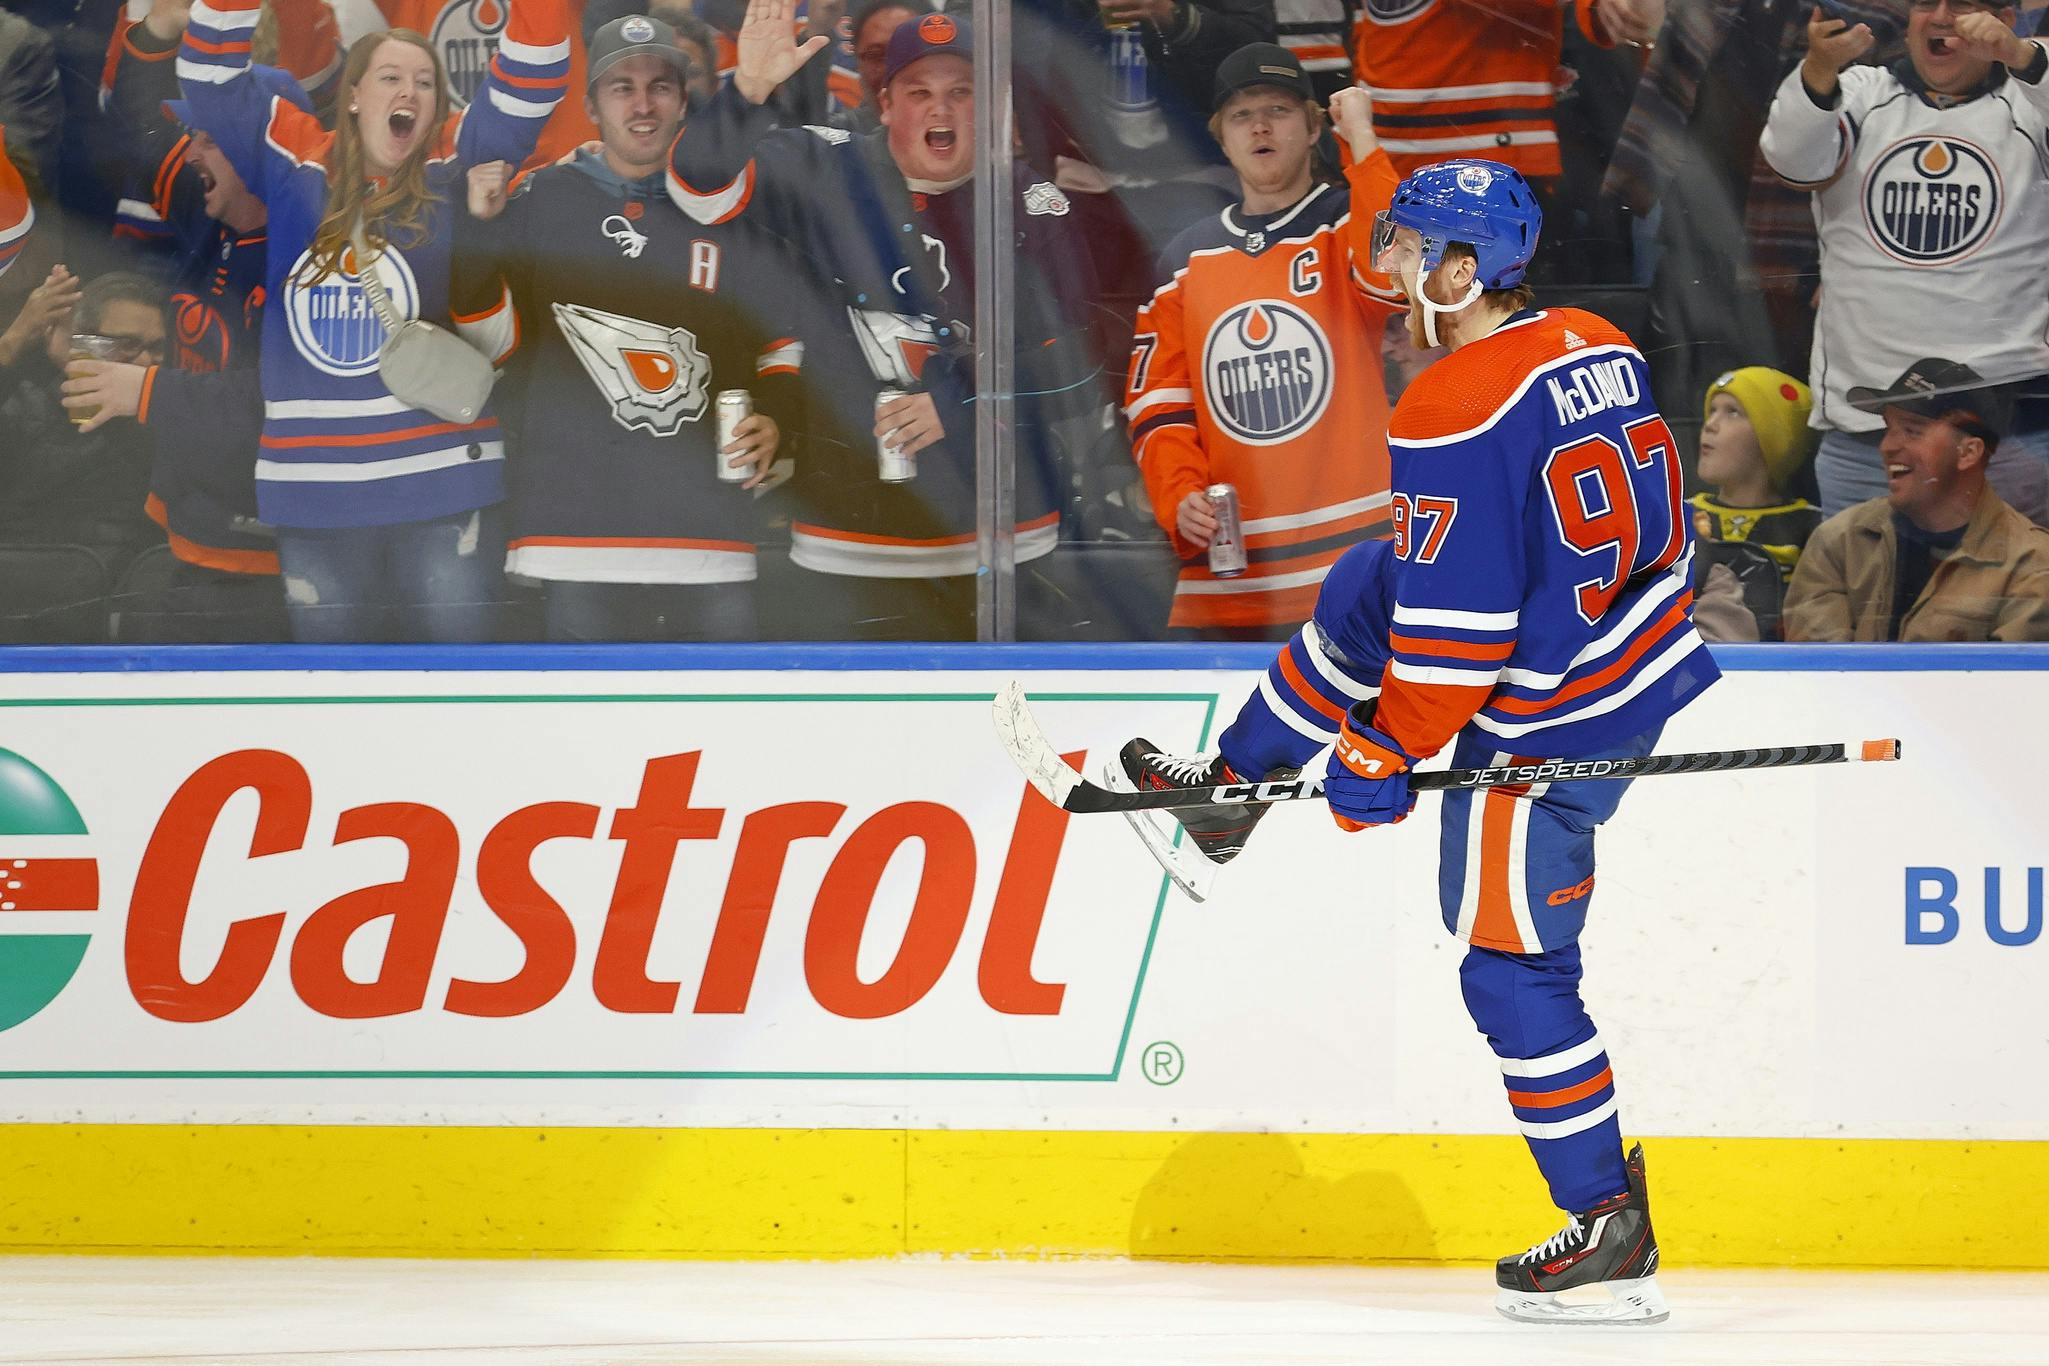 3 Edmonton Oilers who should not return with the team in 2023